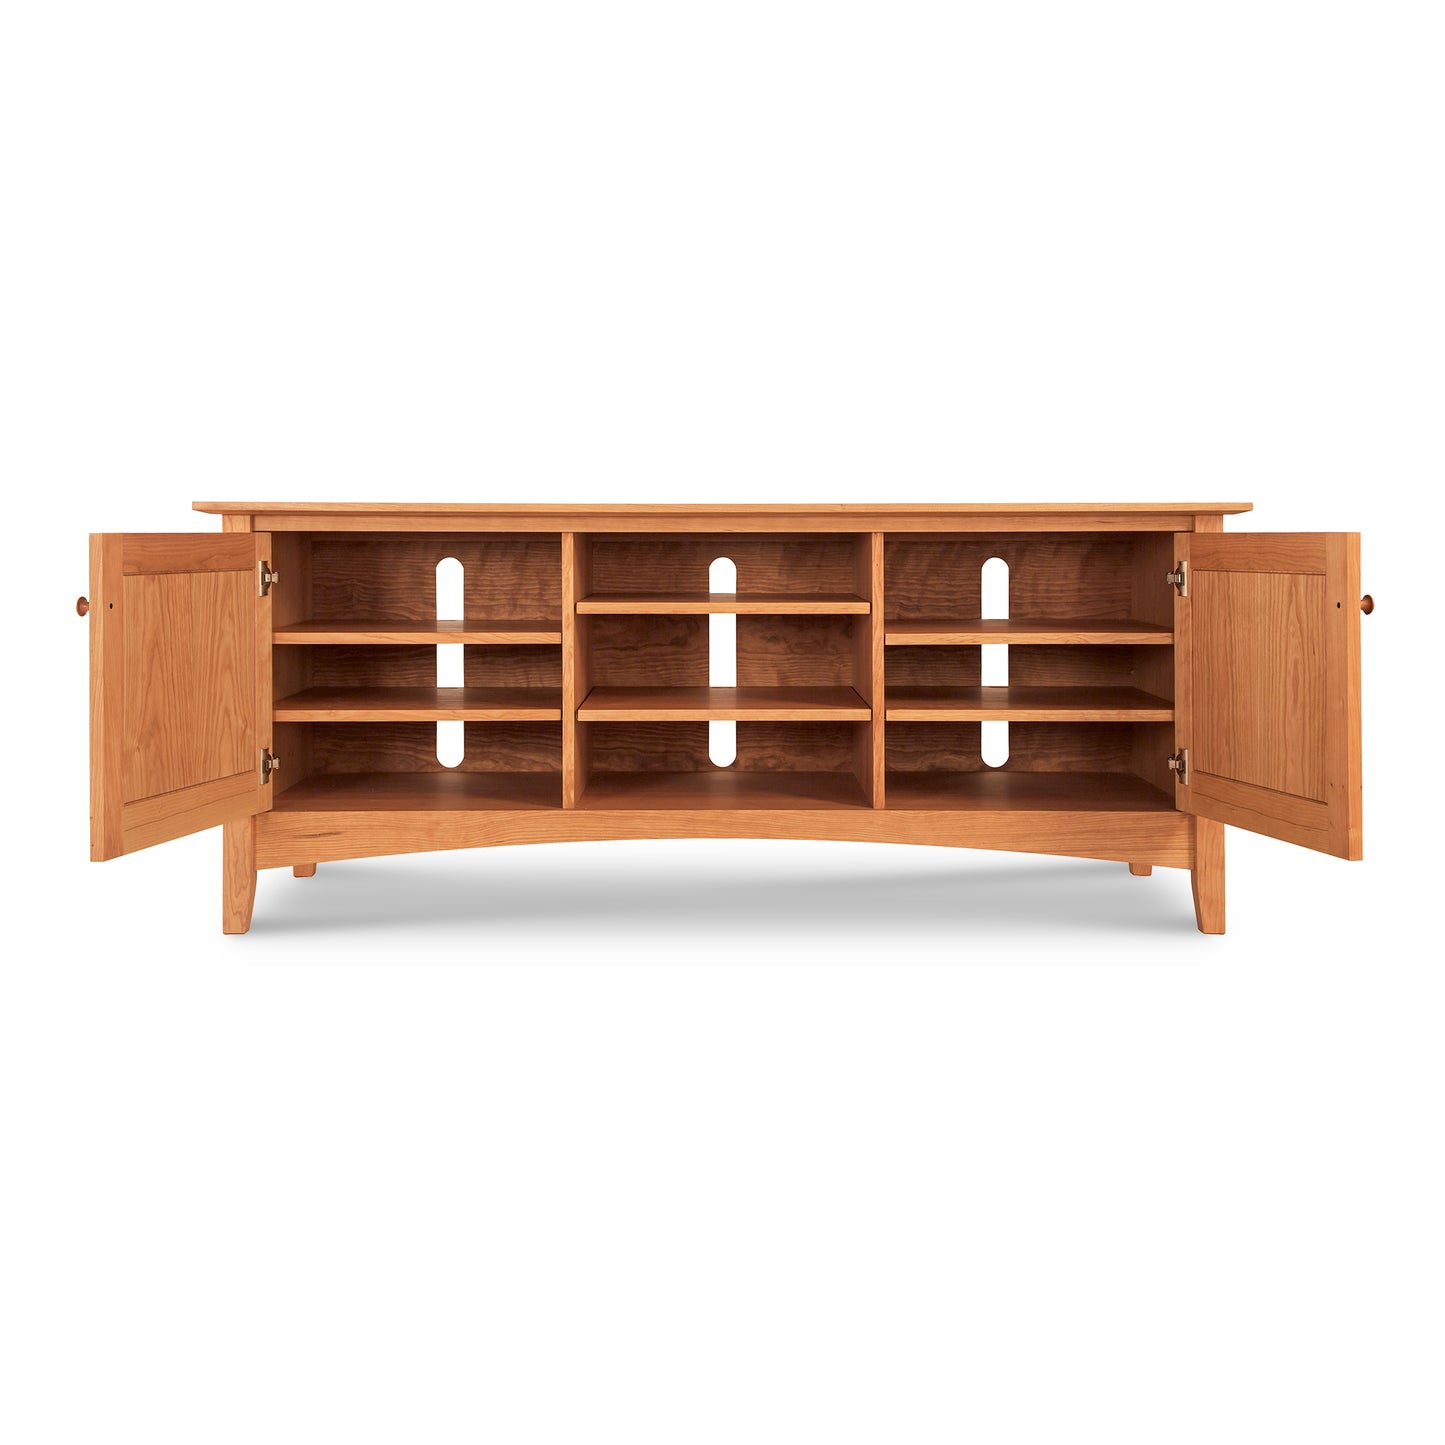 A Maple Corner Woodworks American Shaker 67" TV Stand with open shelf storage and two side cabinets, isolated on a white background.